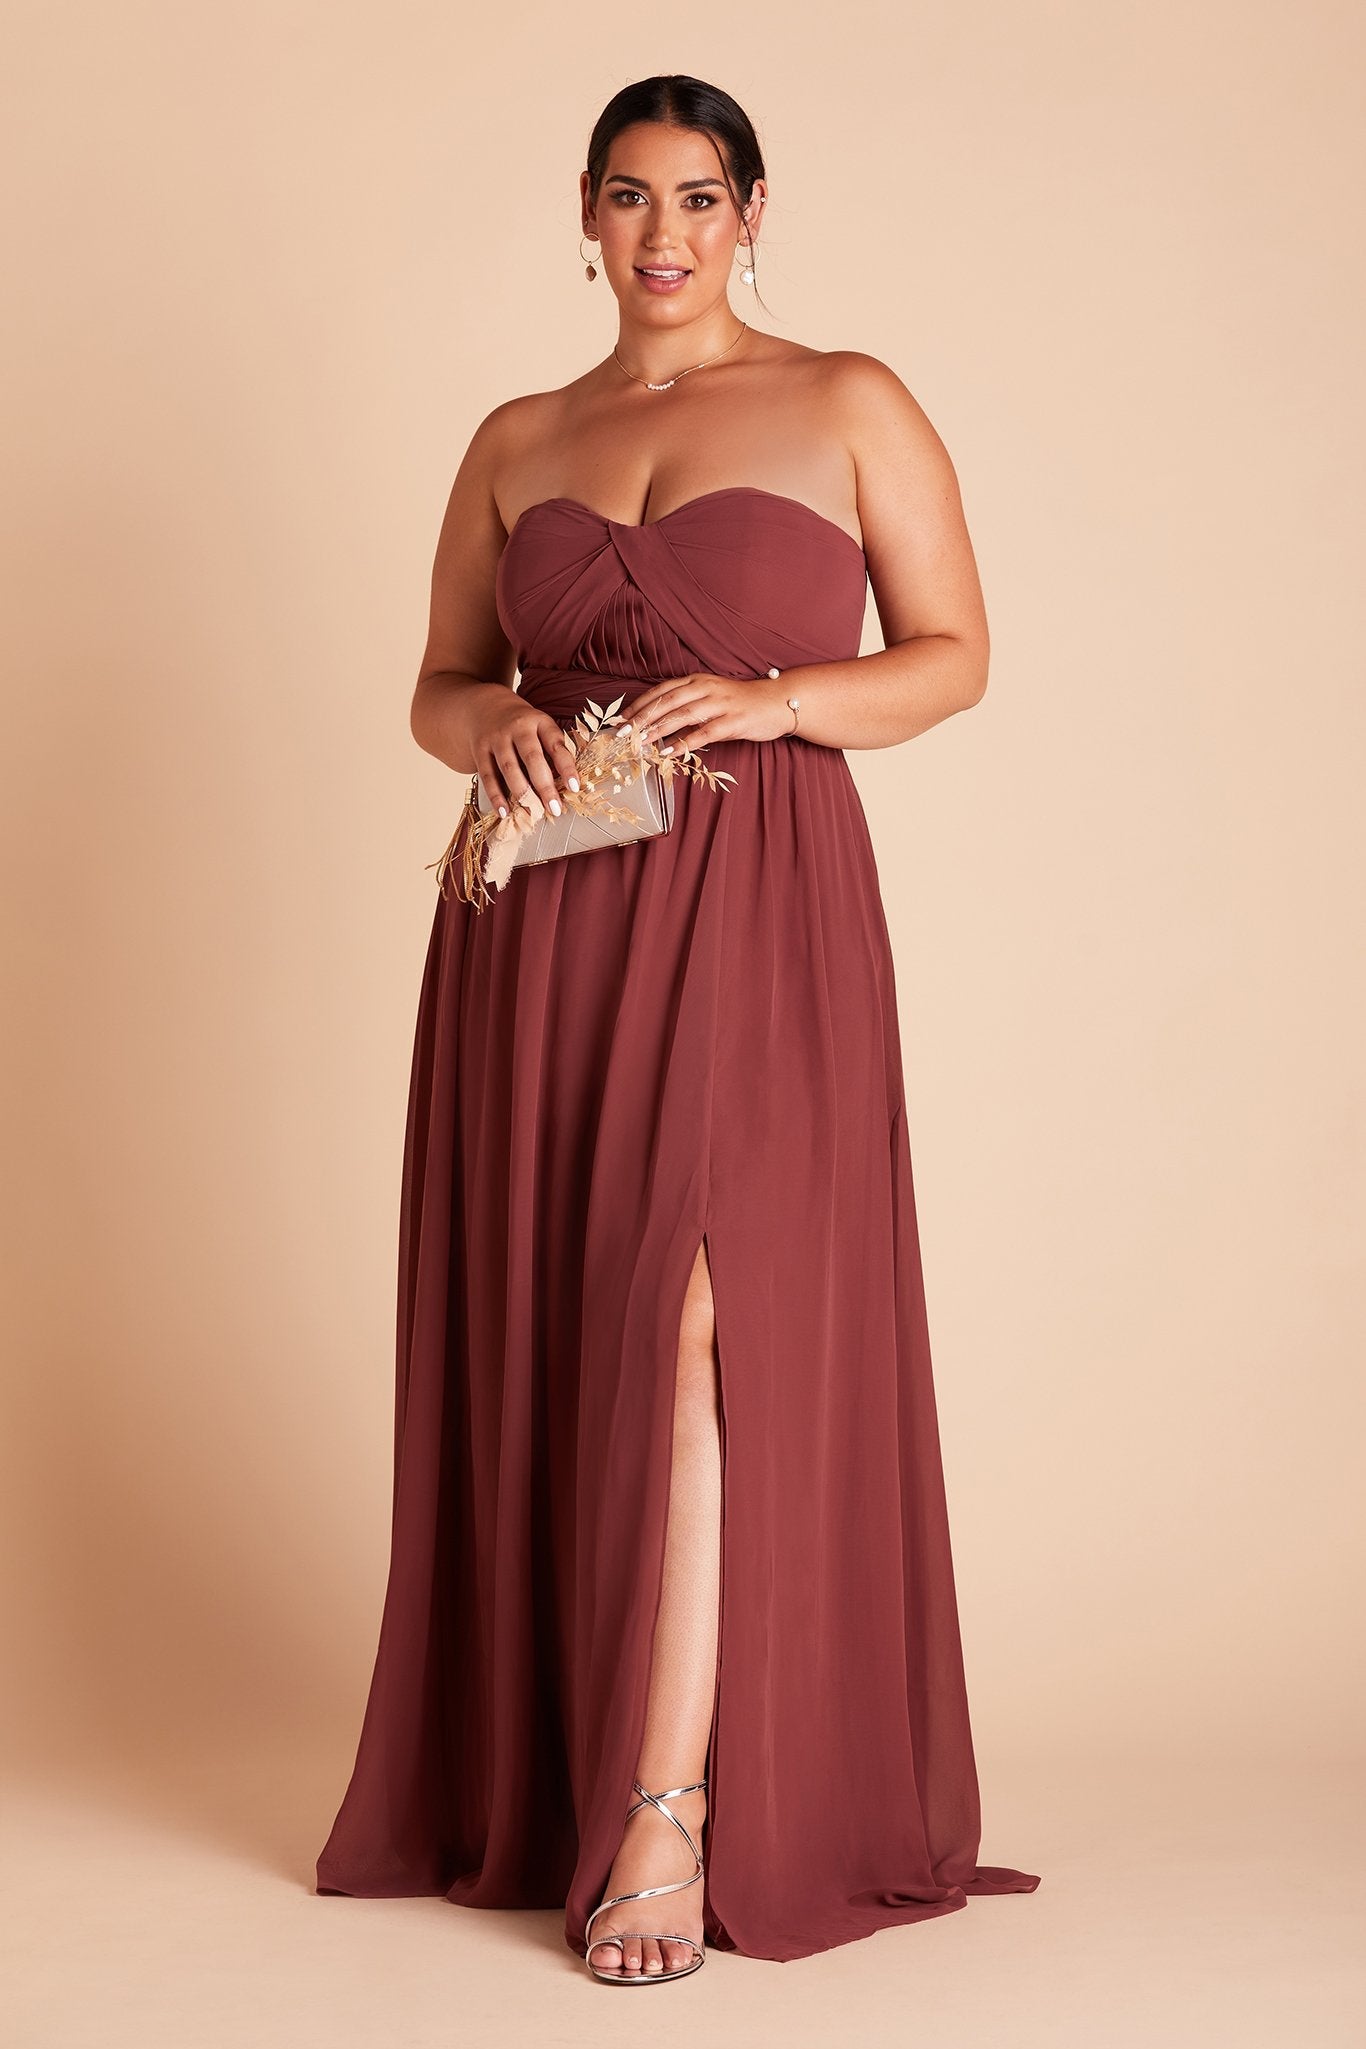 Grace convertible plus size bridesmaid dress with slit in rosewood chiffon by Birdy Grey, front view with hand in pocket